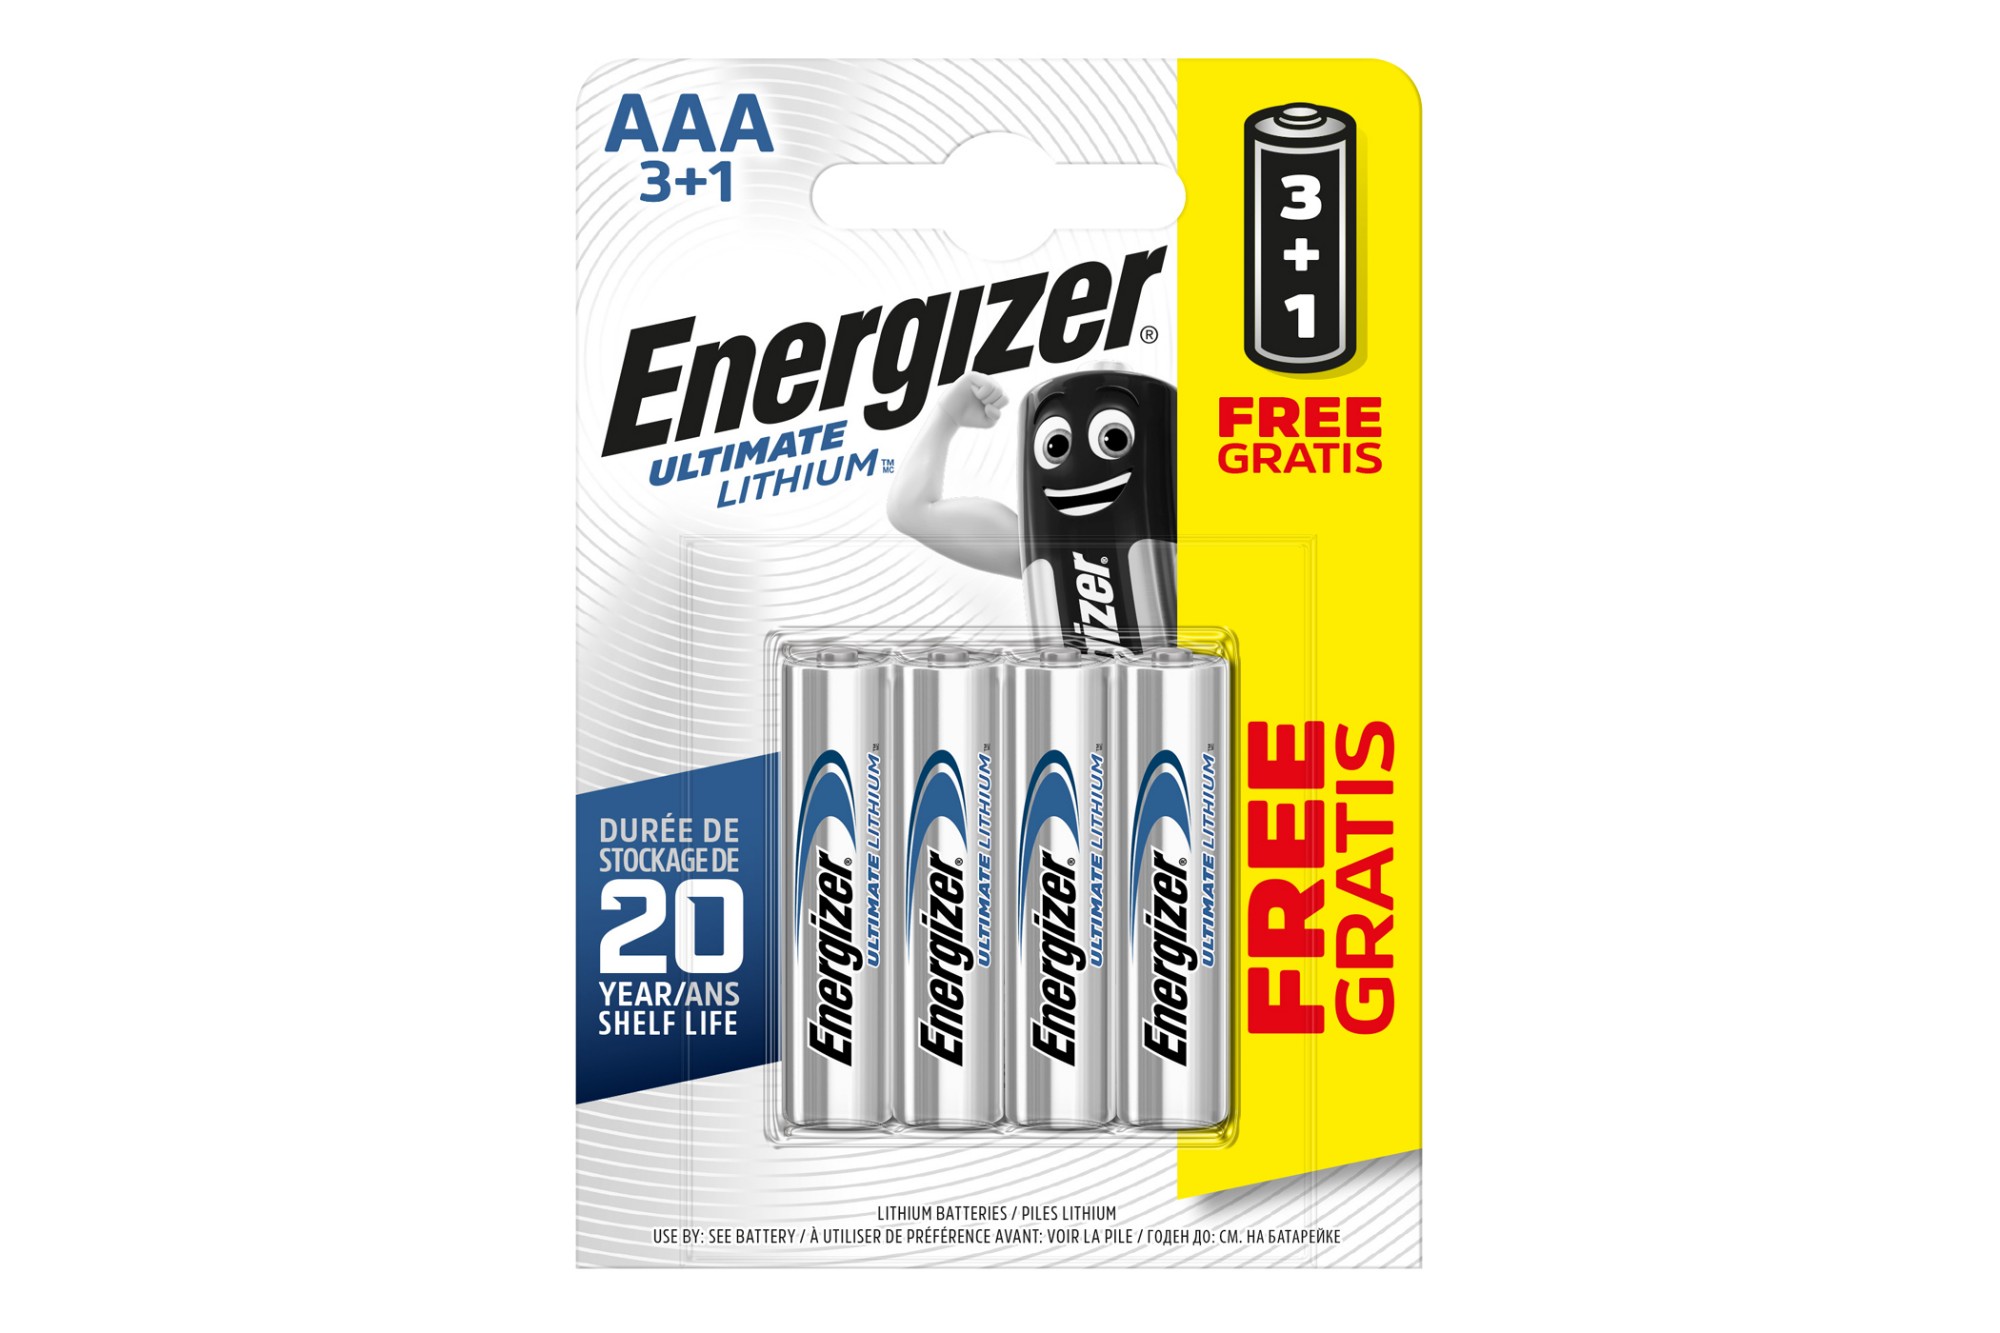 639173 ENERGIZER AAA Ultimate Lithium Batteries - Pack of 4